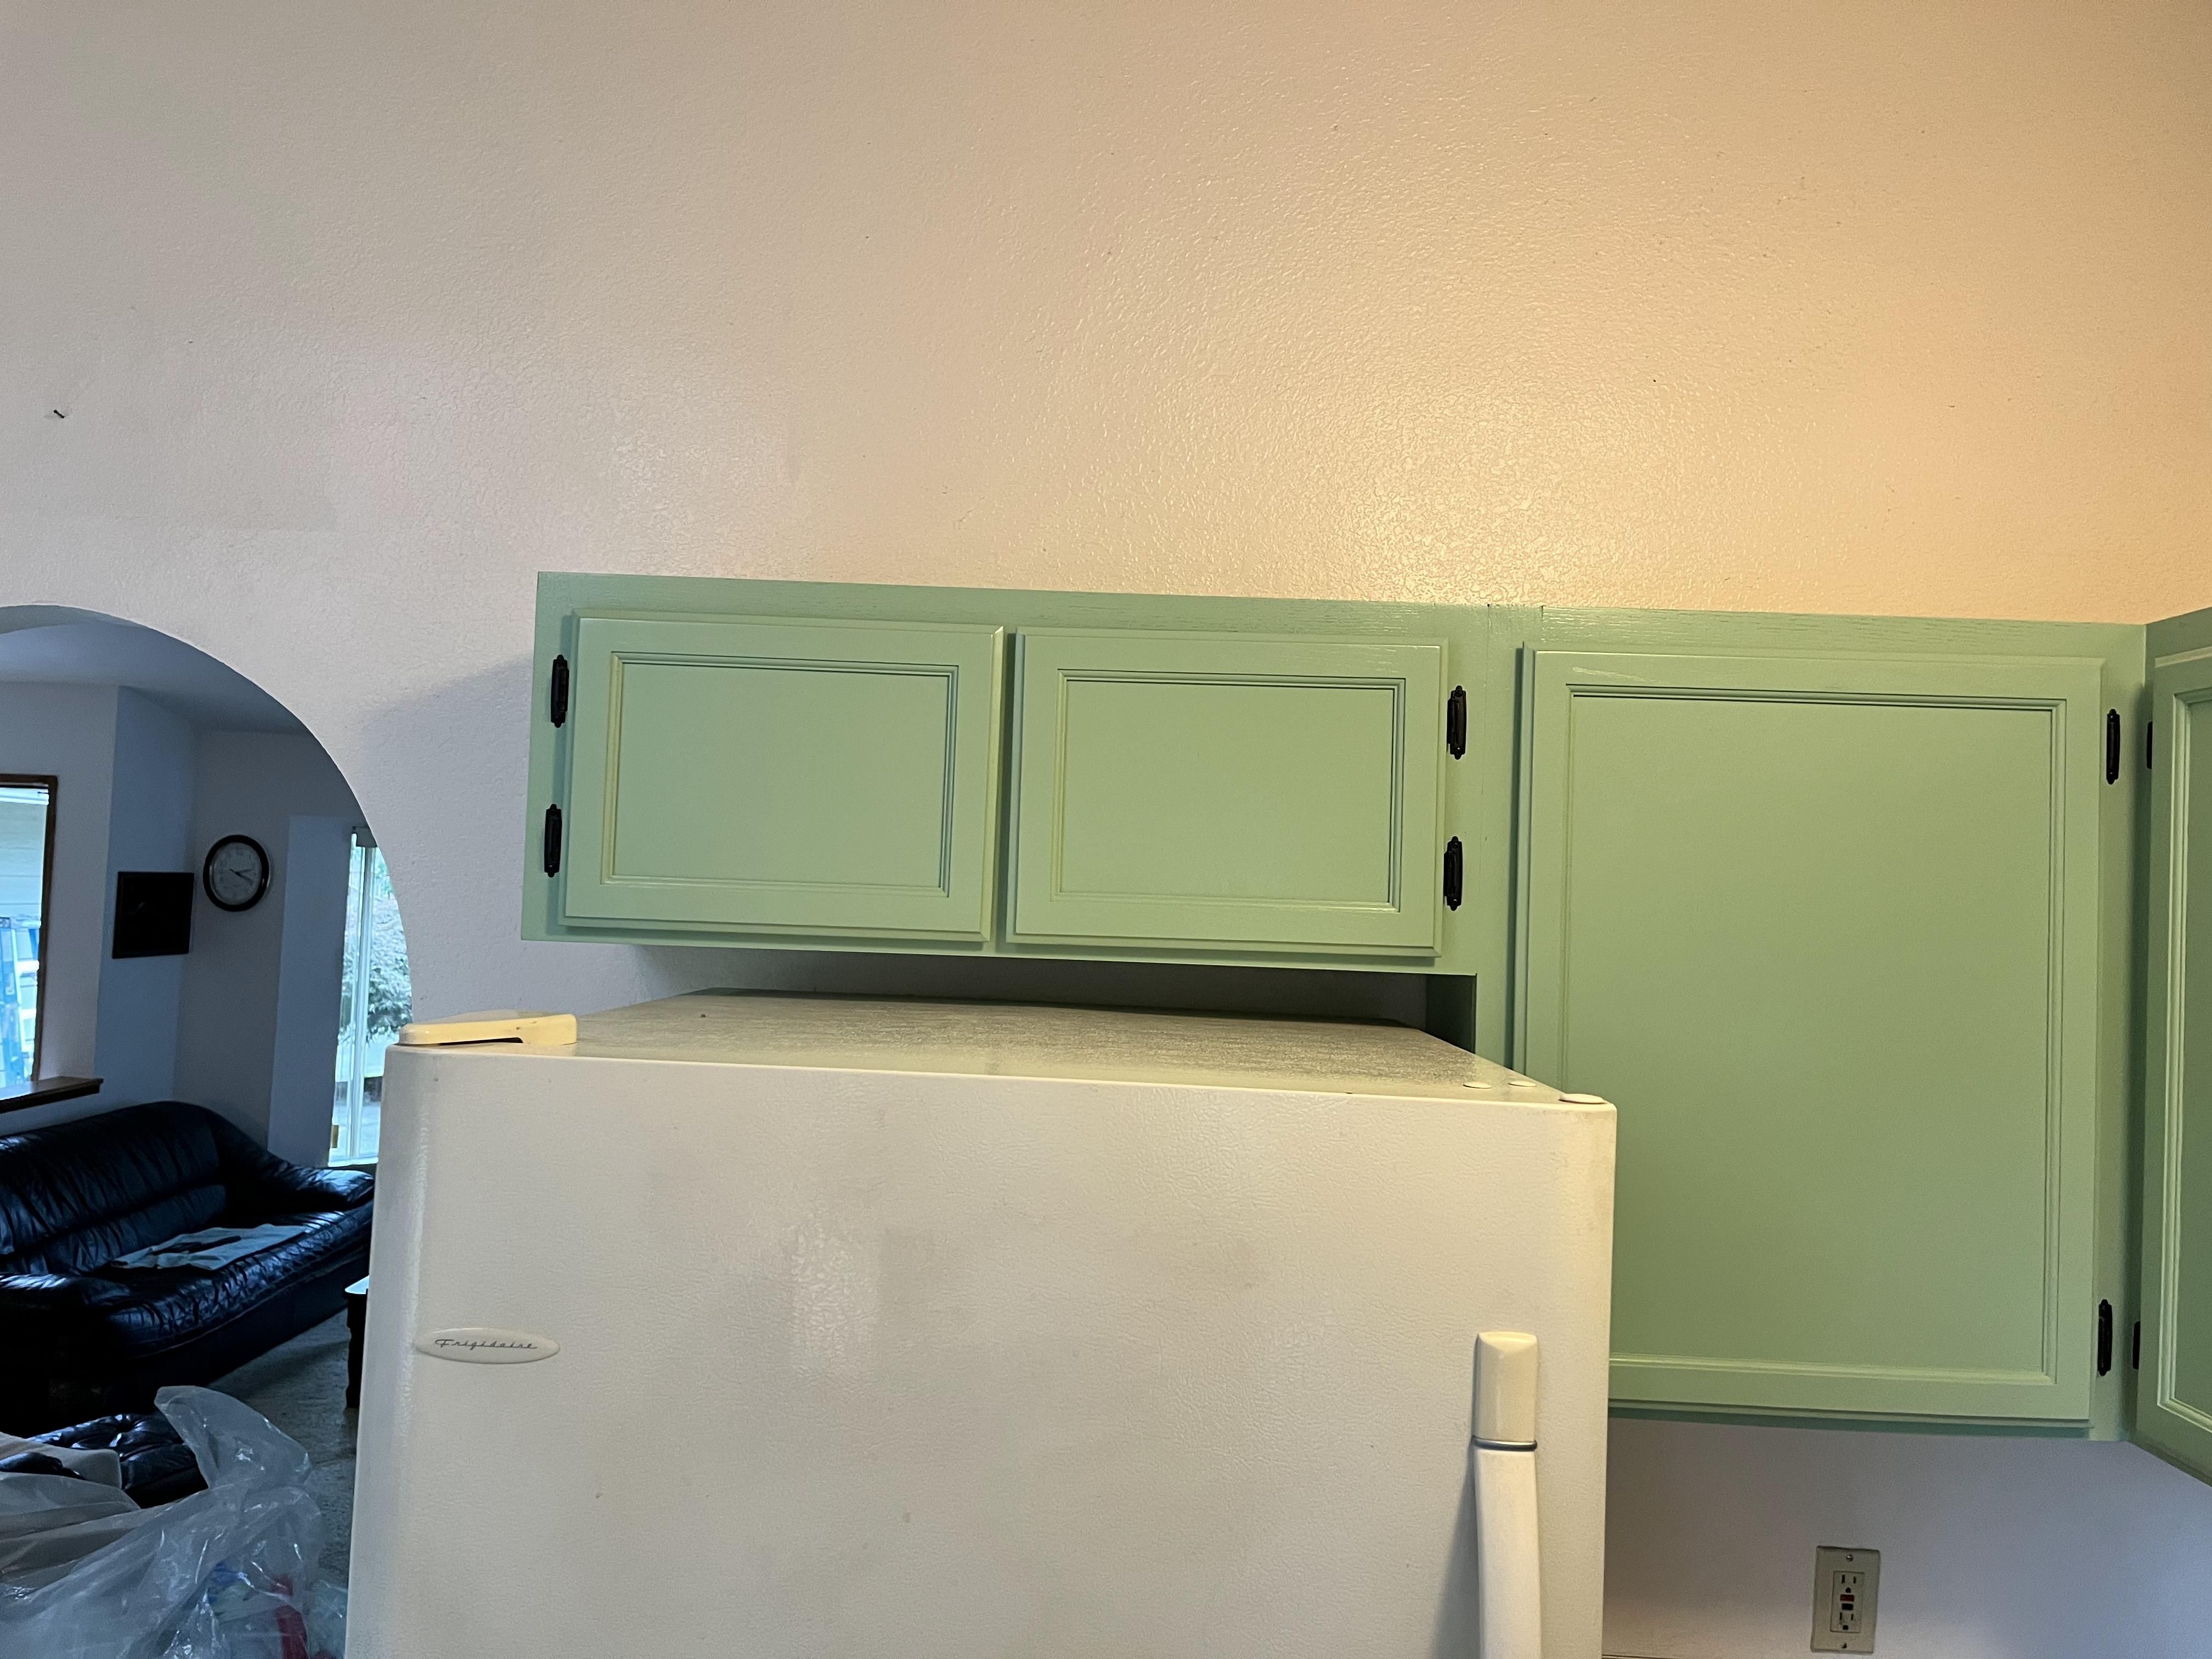 Kitchen and Cabinet Refinishing for Golden Line Painting, LLC in Seattle, WA